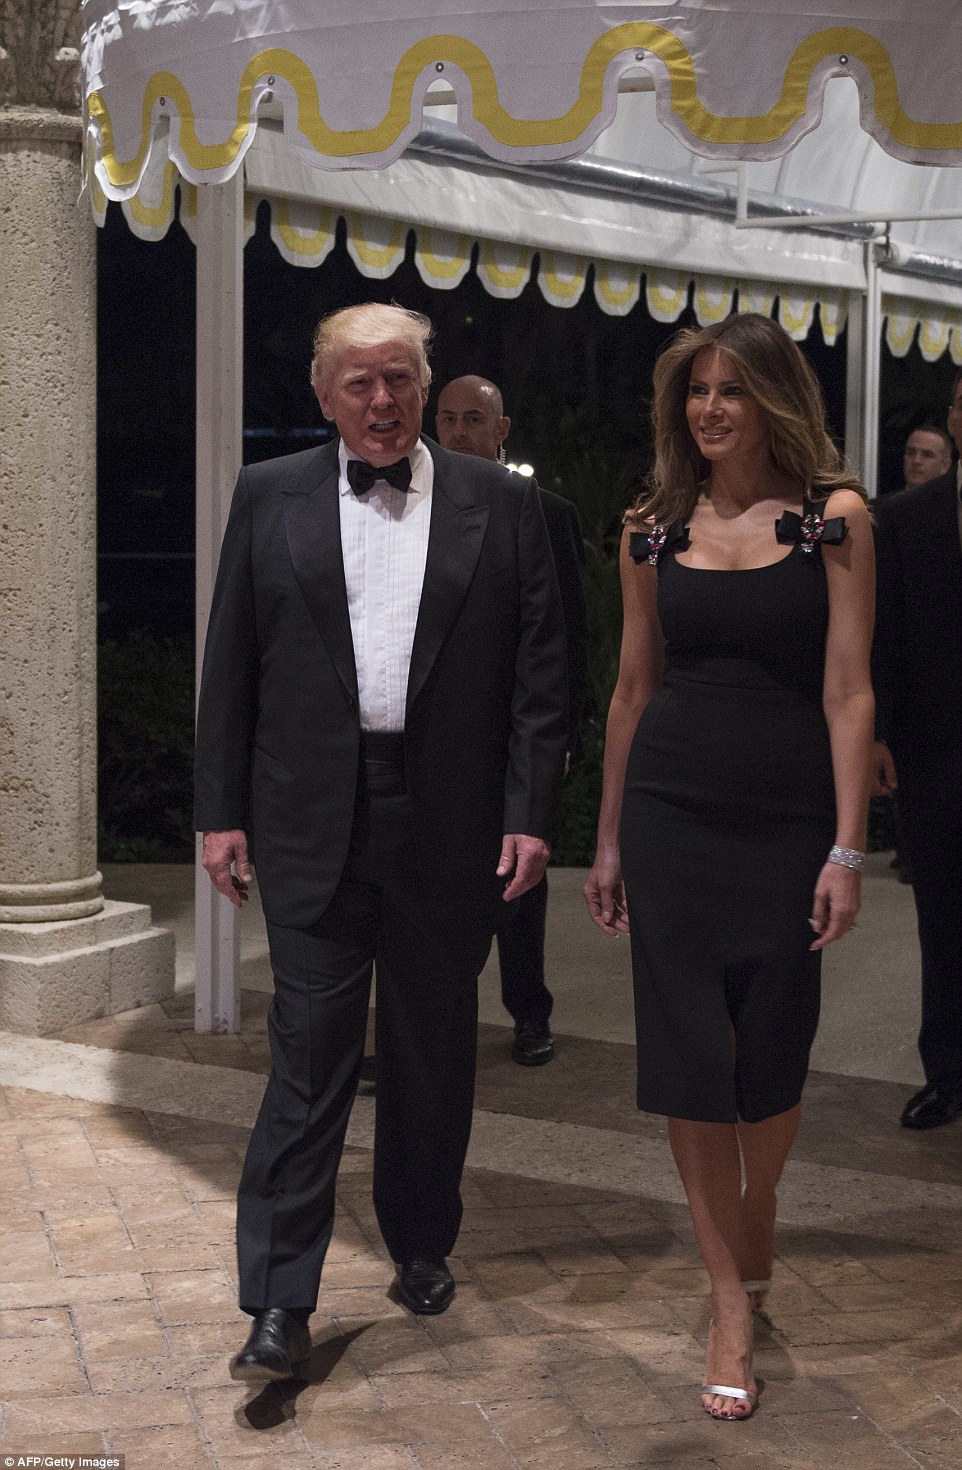 LET'S DO THIS AGAIN: Then-President-elect Donald Trump arrives with his wife Melania for a New Year's Eve party December 31, 2016 at Mar-a-Lago